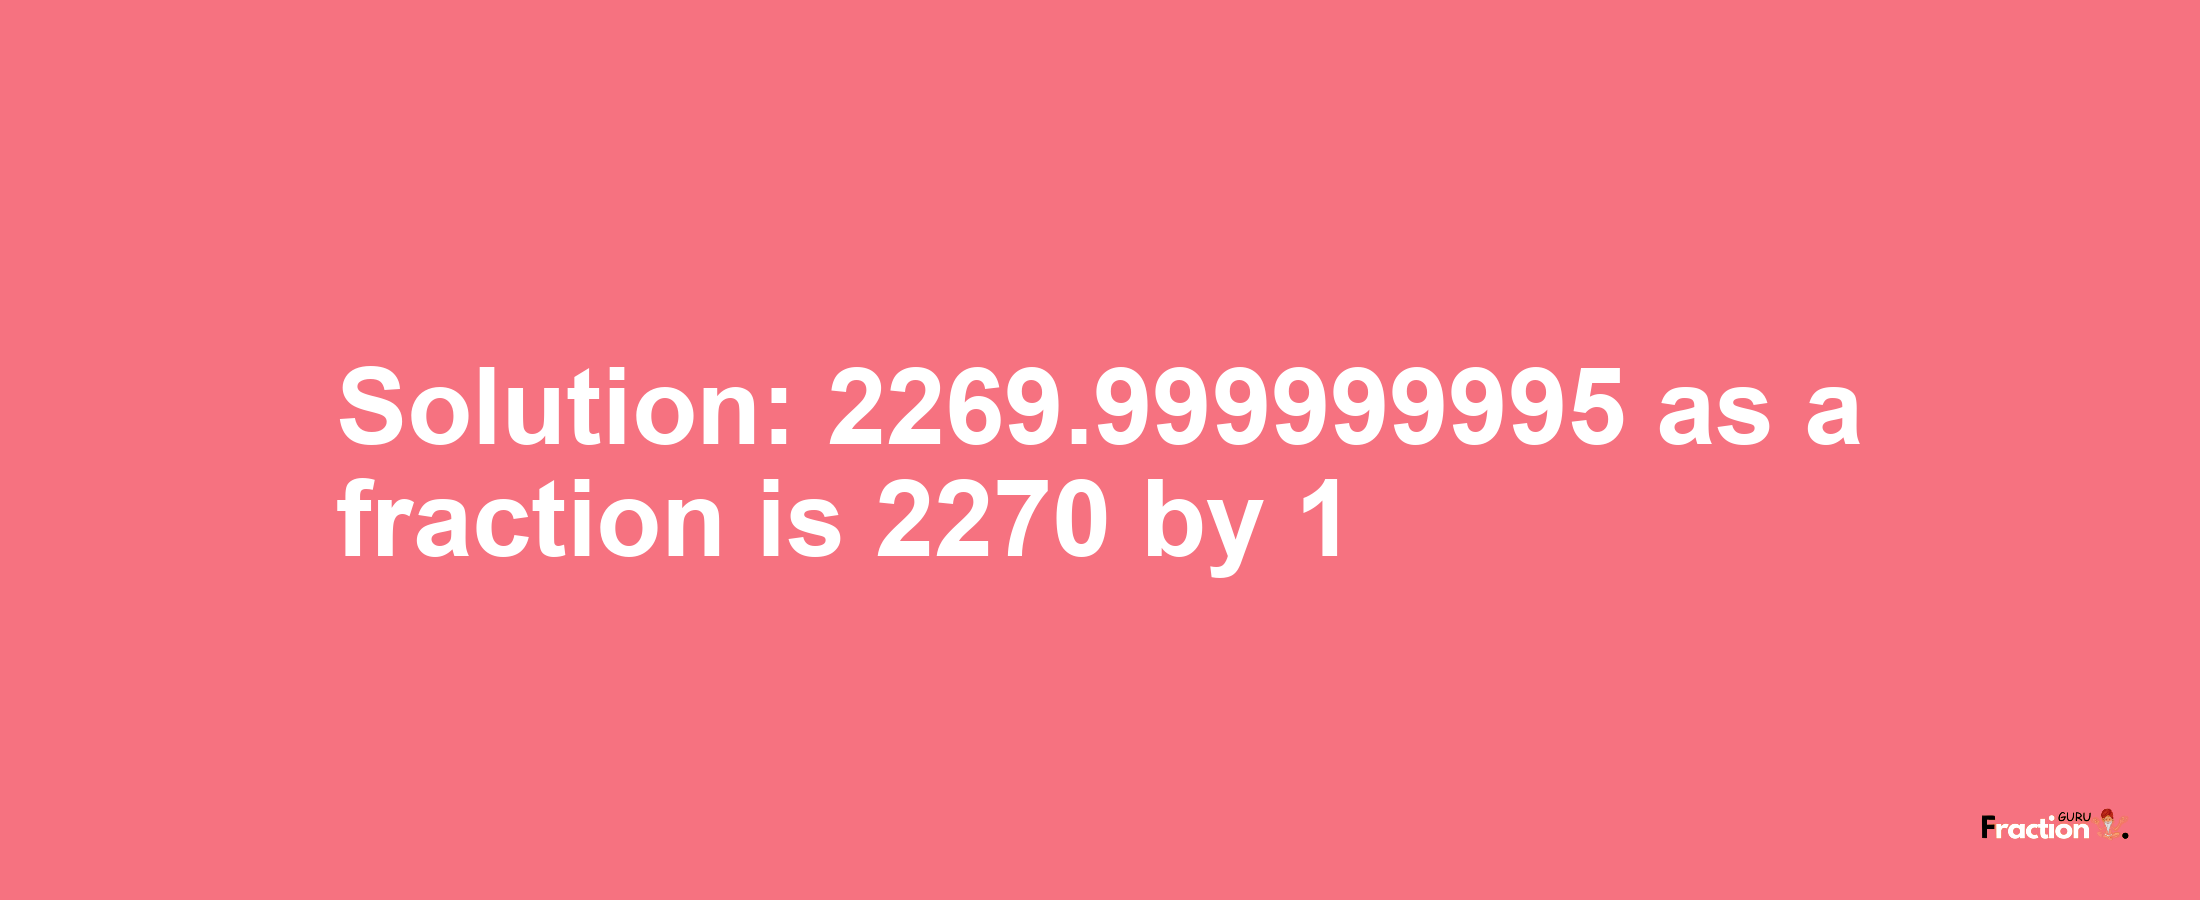 Solution:2269.999999995 as a fraction is 2270/1